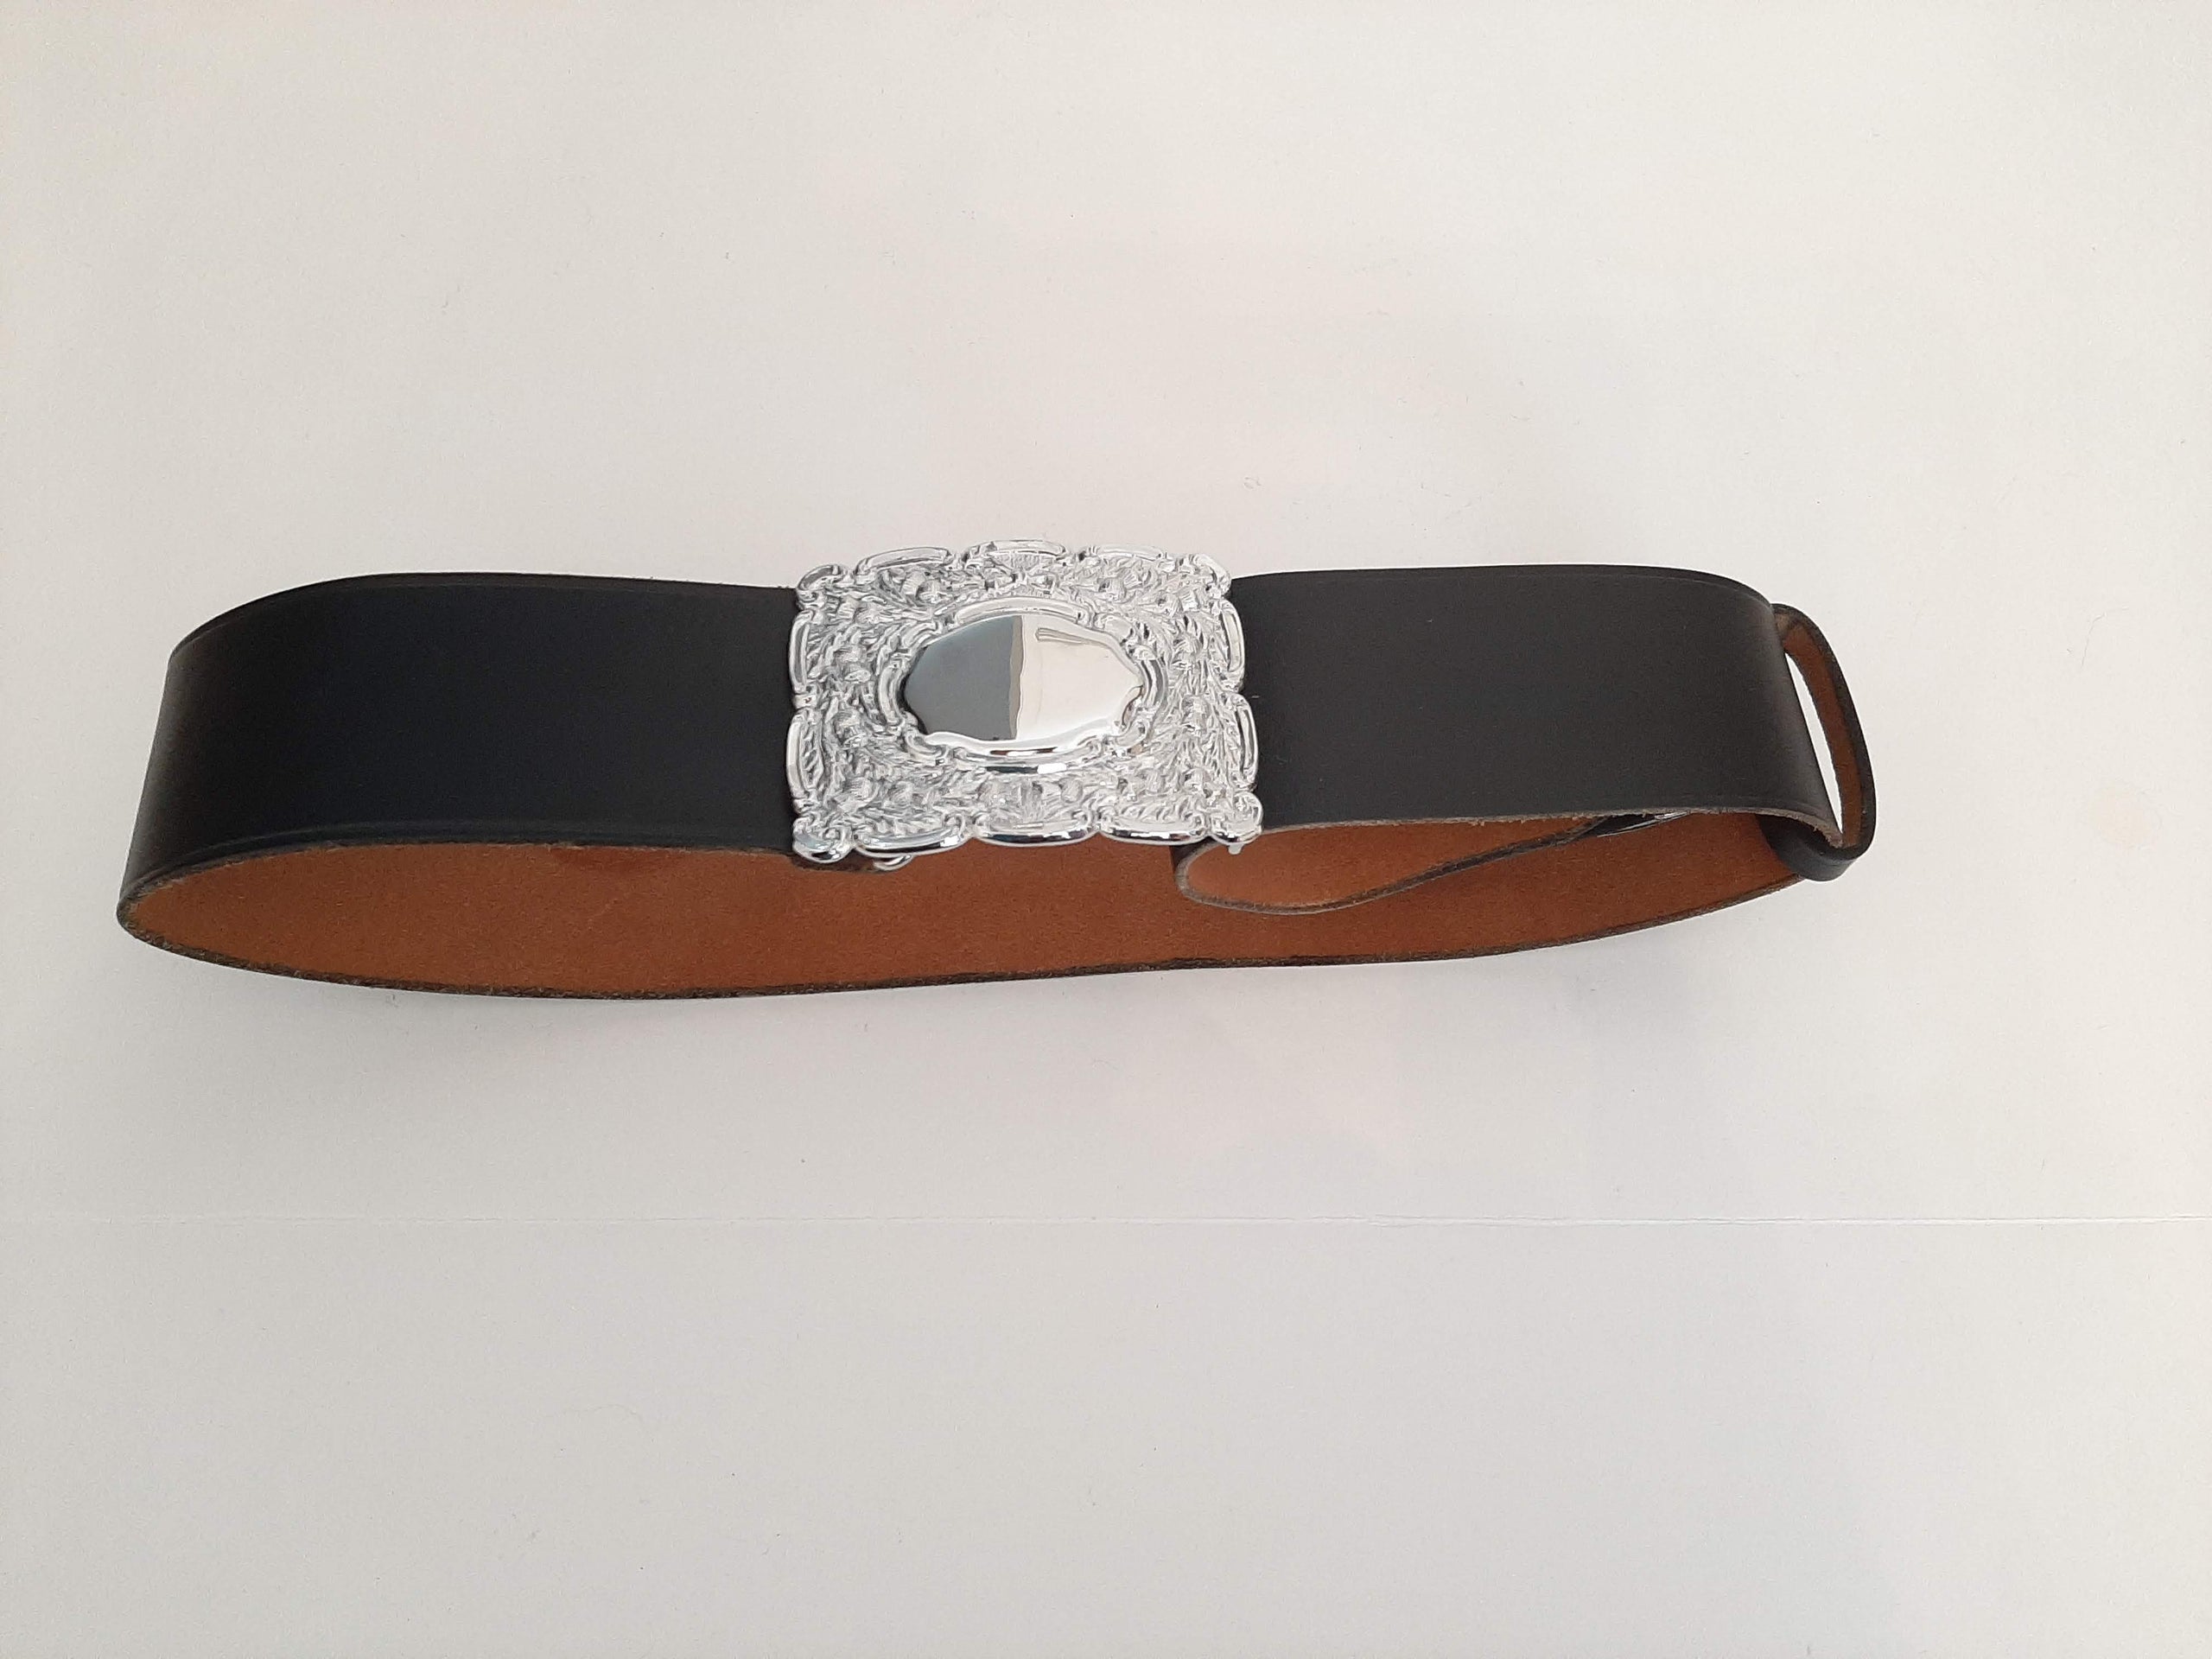 Pipers Belt and Buckle - 190520I